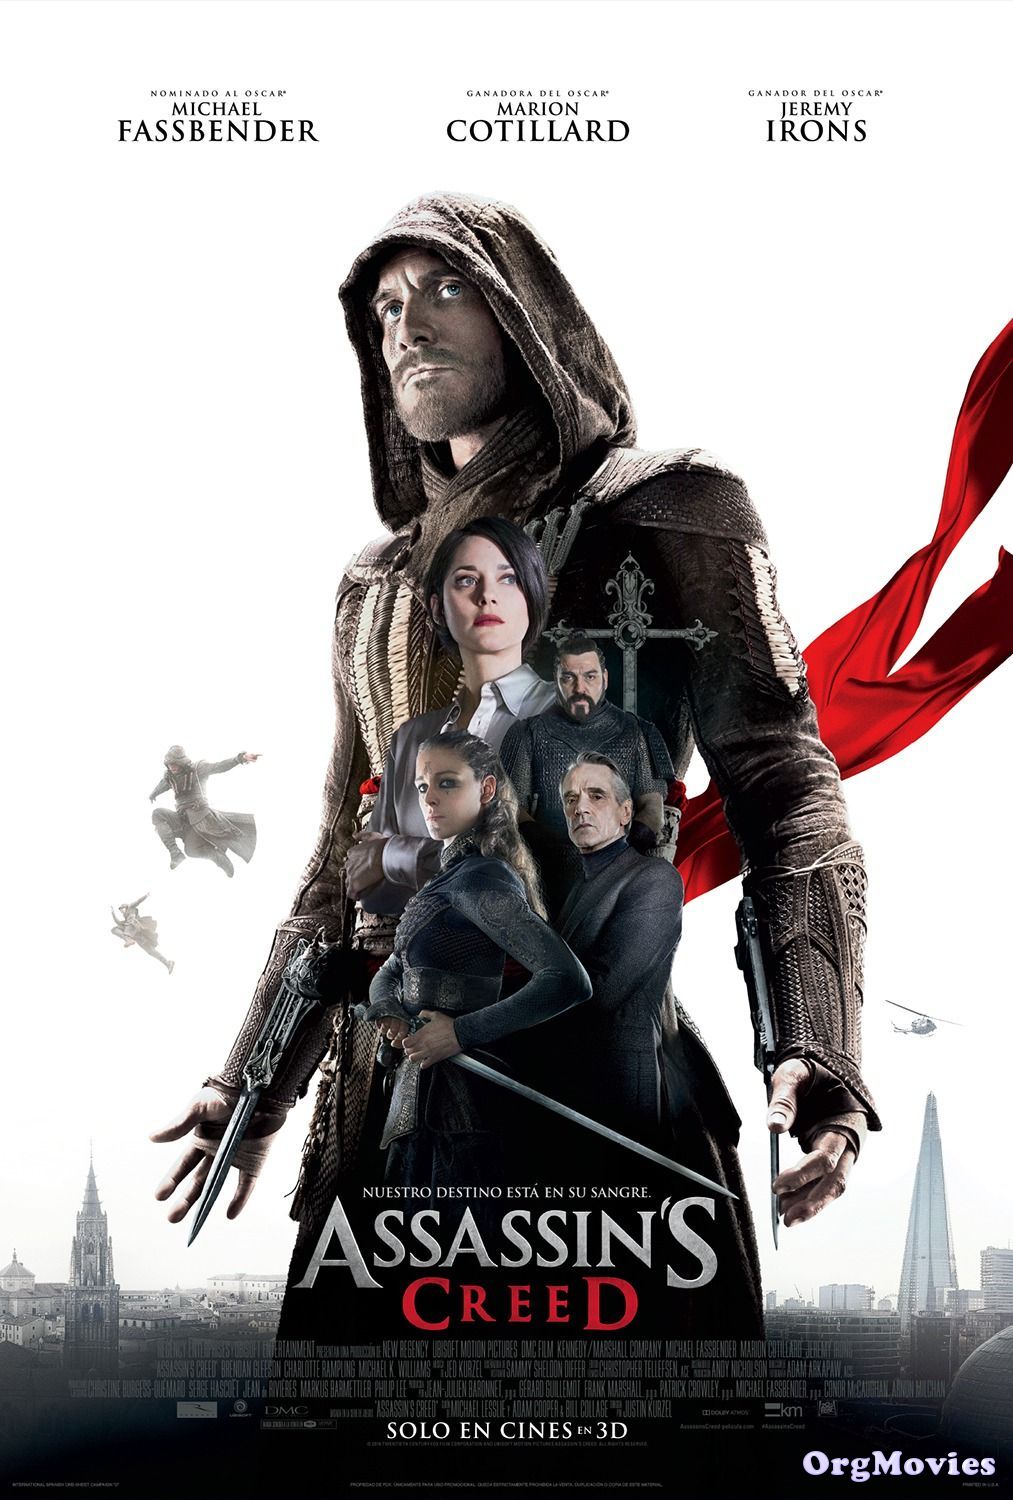 Assassins Creed 2016 Hindi Dubbed full Movie download full movie